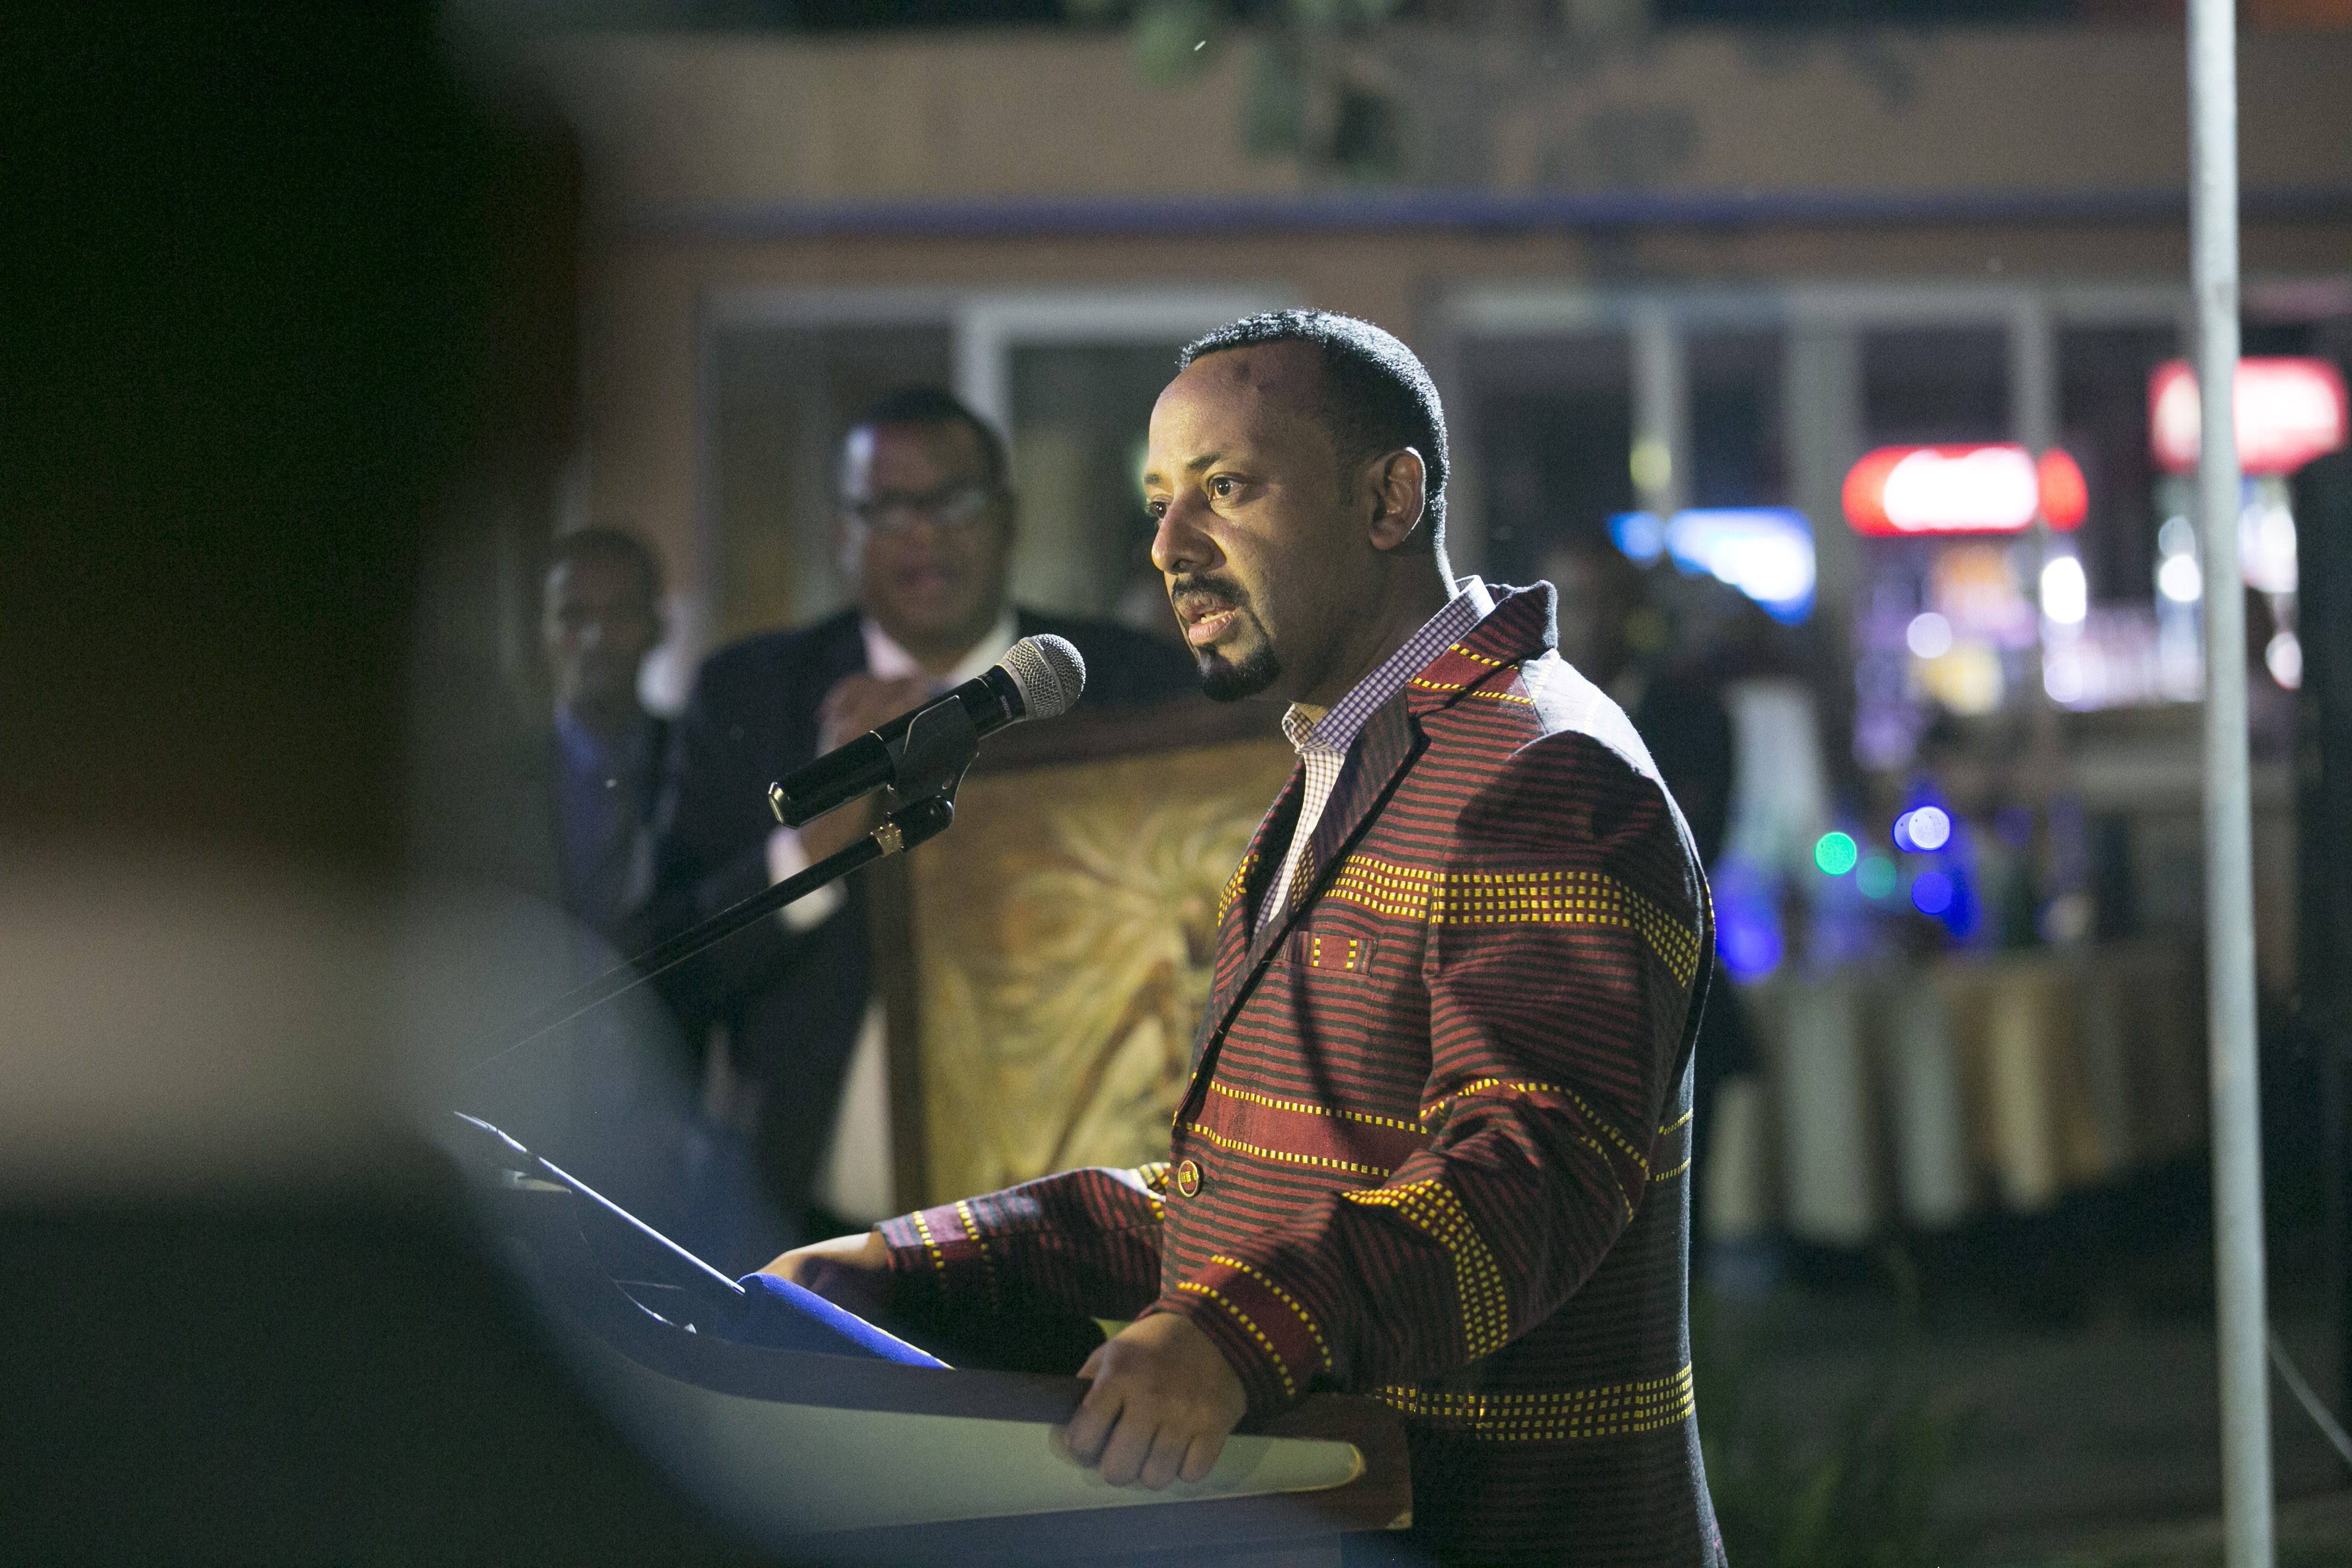 Prime Minister Abiy Ahmed speaks at a reception organised in honor of Paul Kagame (photo credit: Paul Kagame/Flickr)